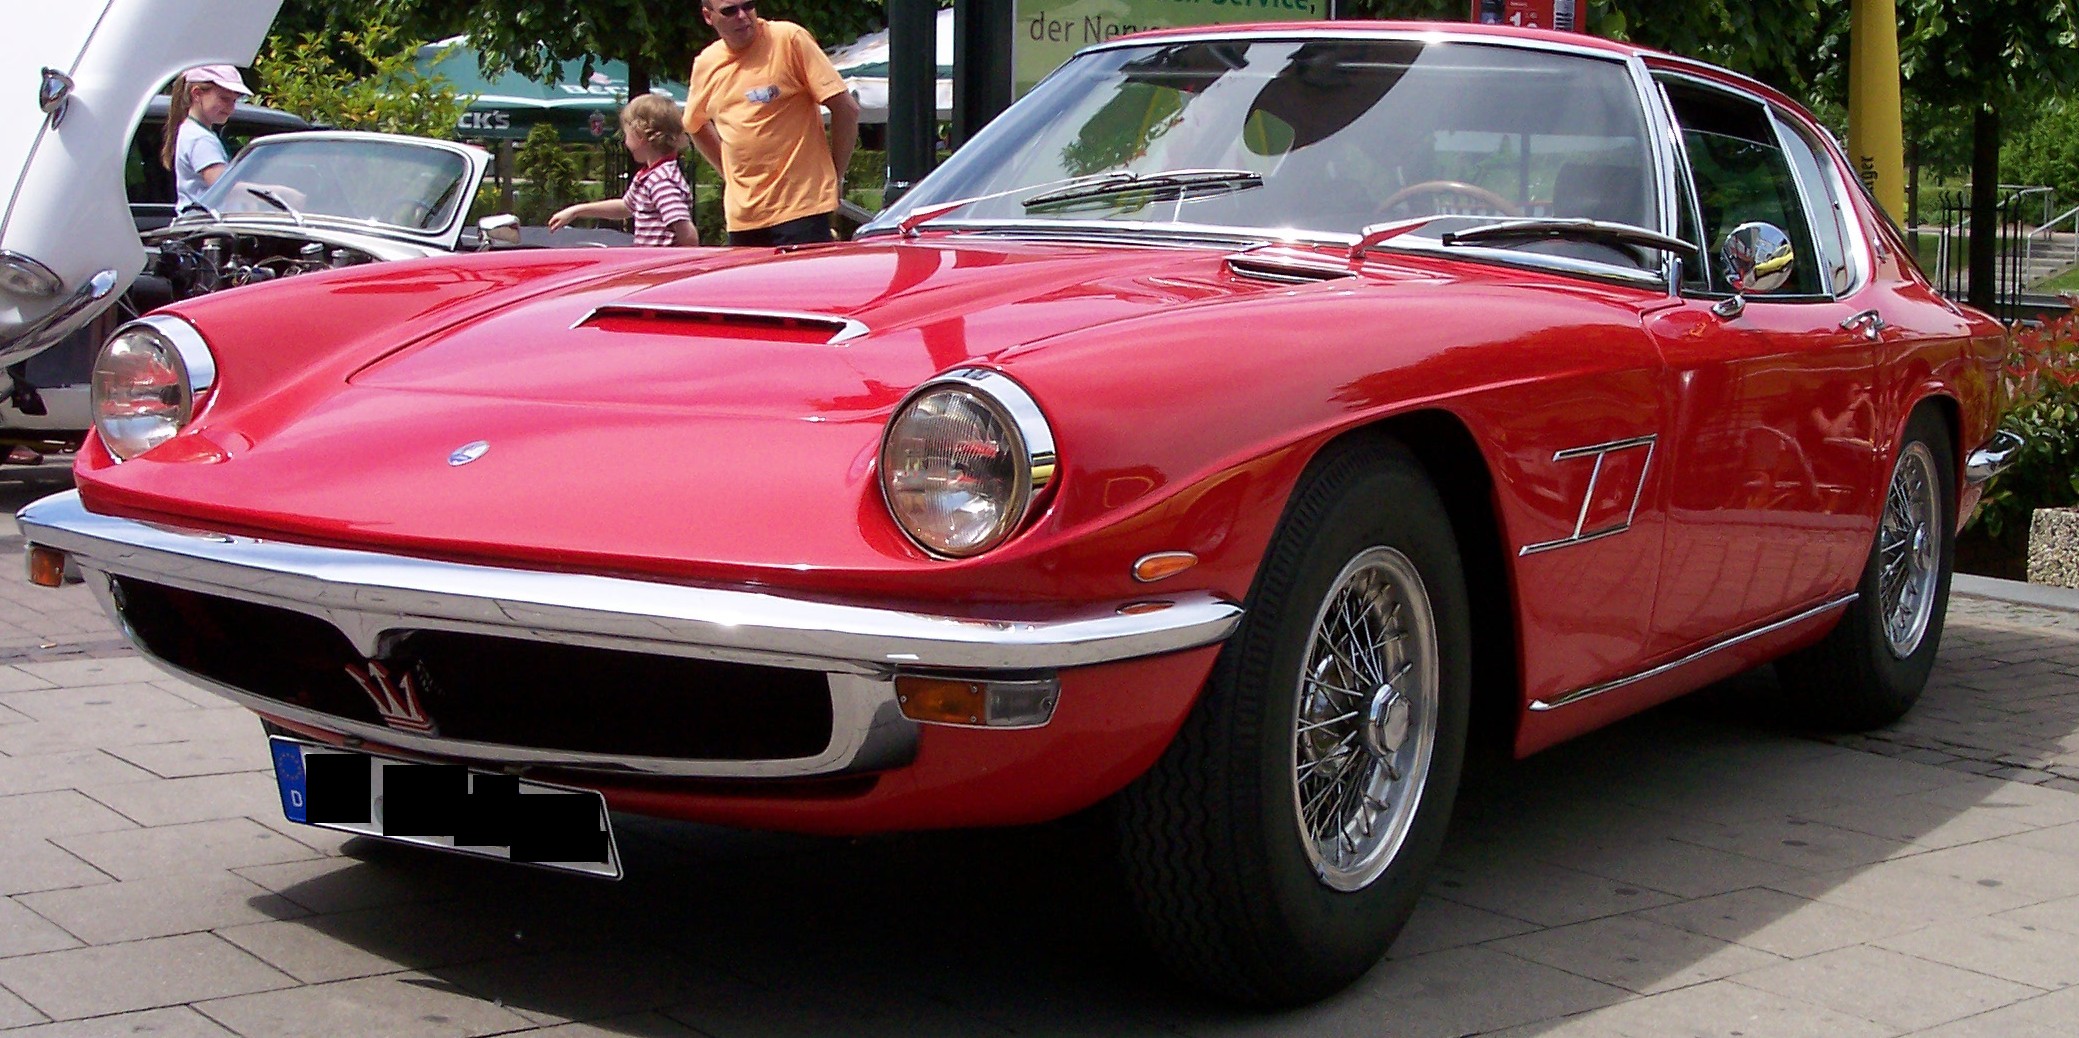 Maserati Mistral technical details, history, photos on ...